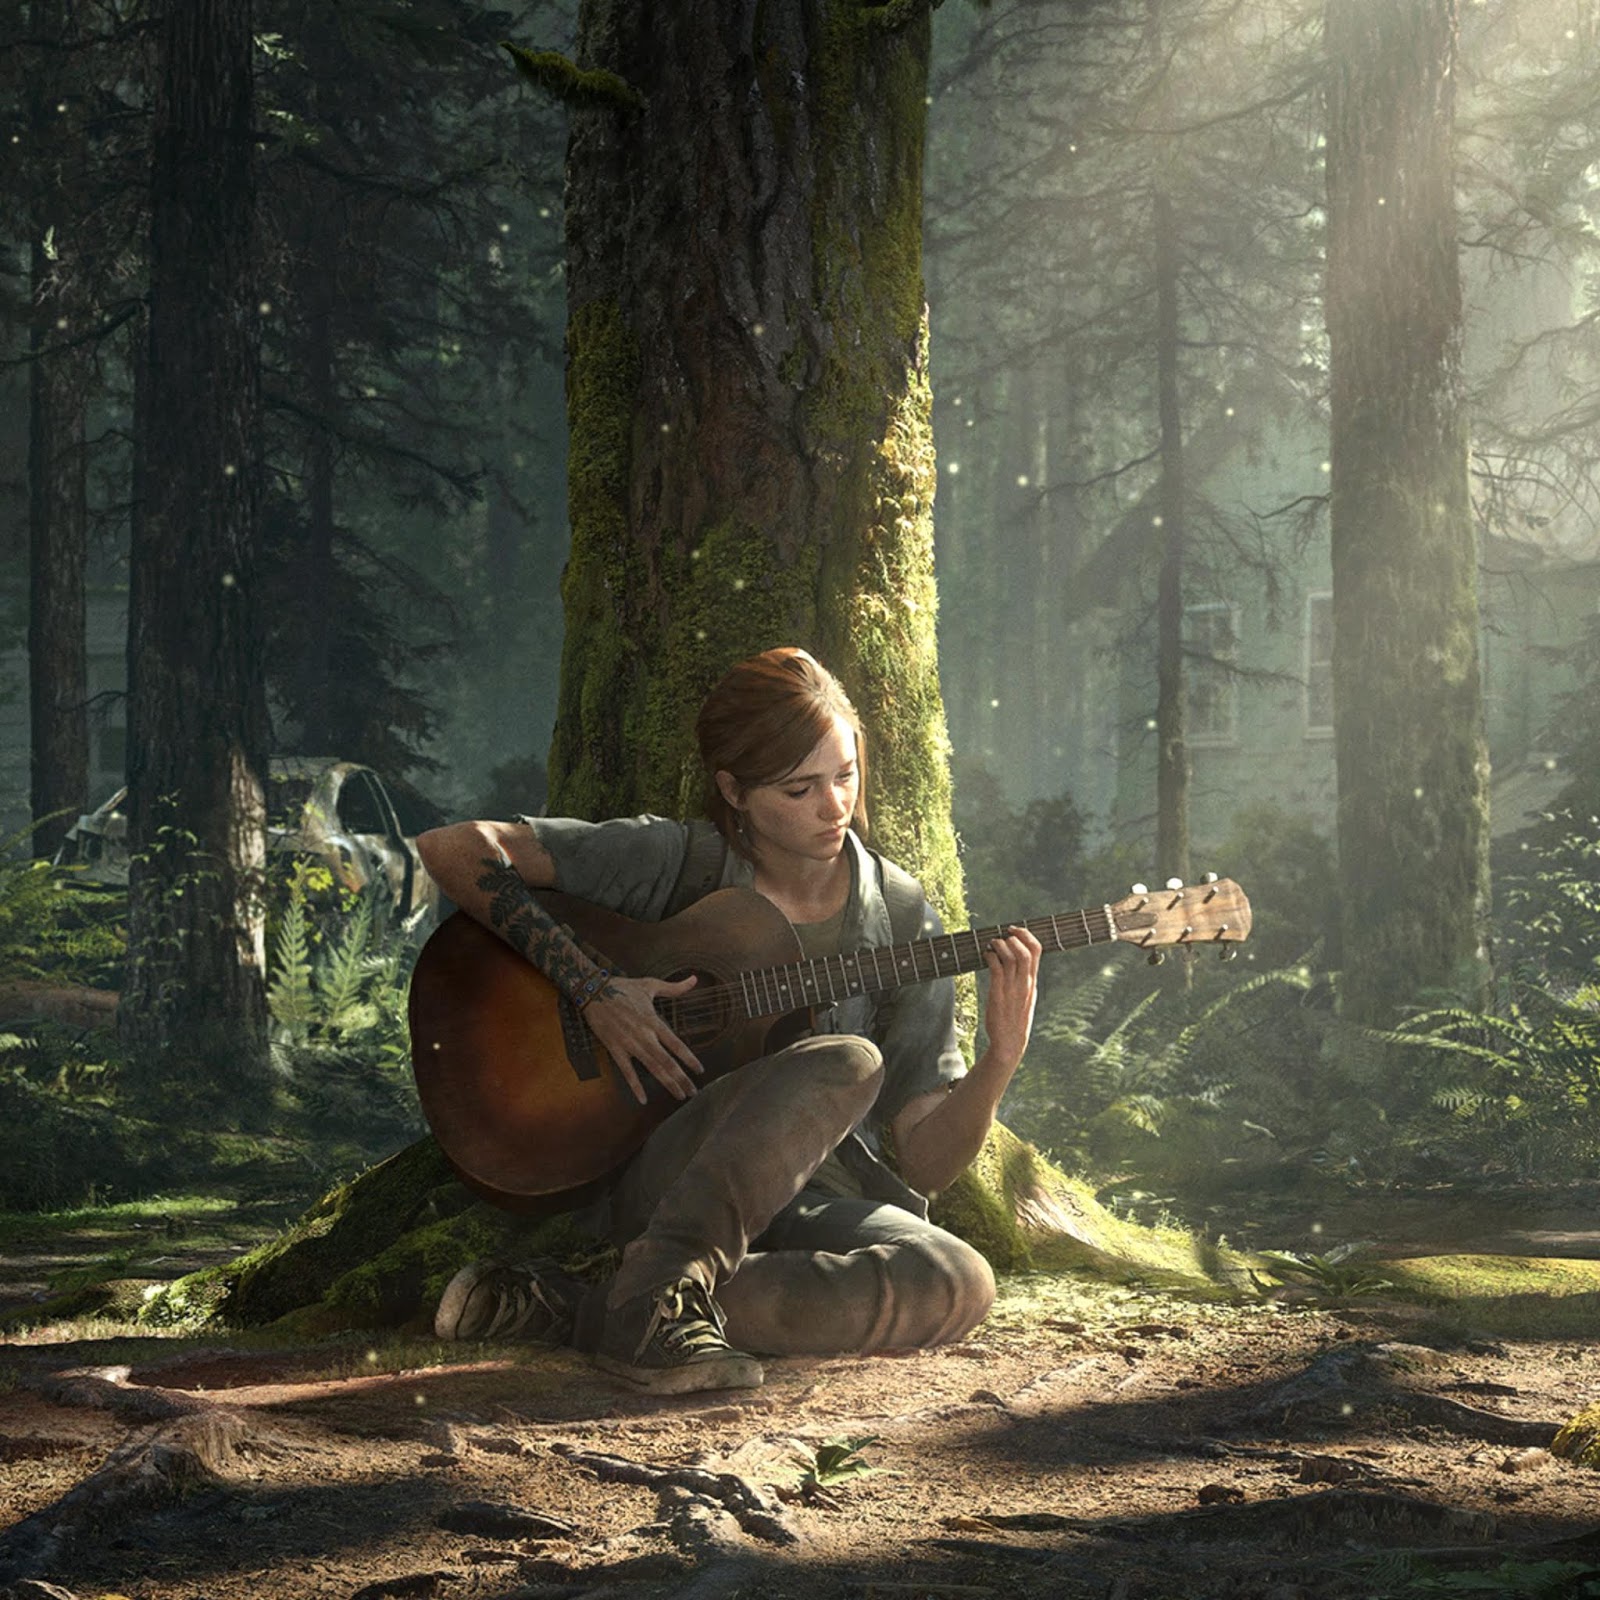  wallpaper  engine  The Last of Us  Part II Day theme free 